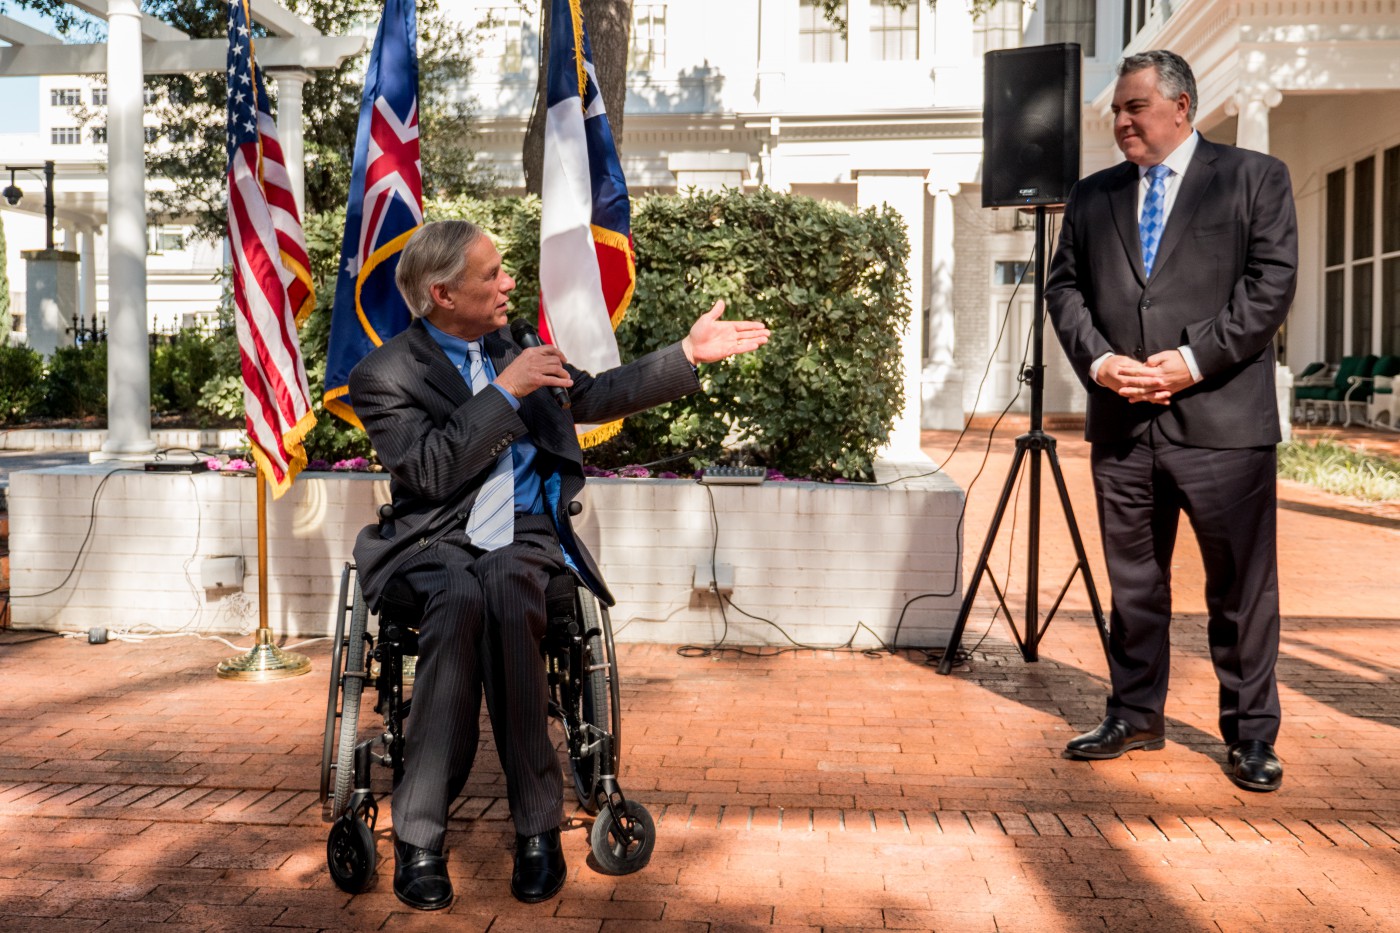 Governor Abbott Delivers Remarks At The 2019 Great Mates Australia-Texas Barbecue Office of the Texas Governor Greg Abbott photo